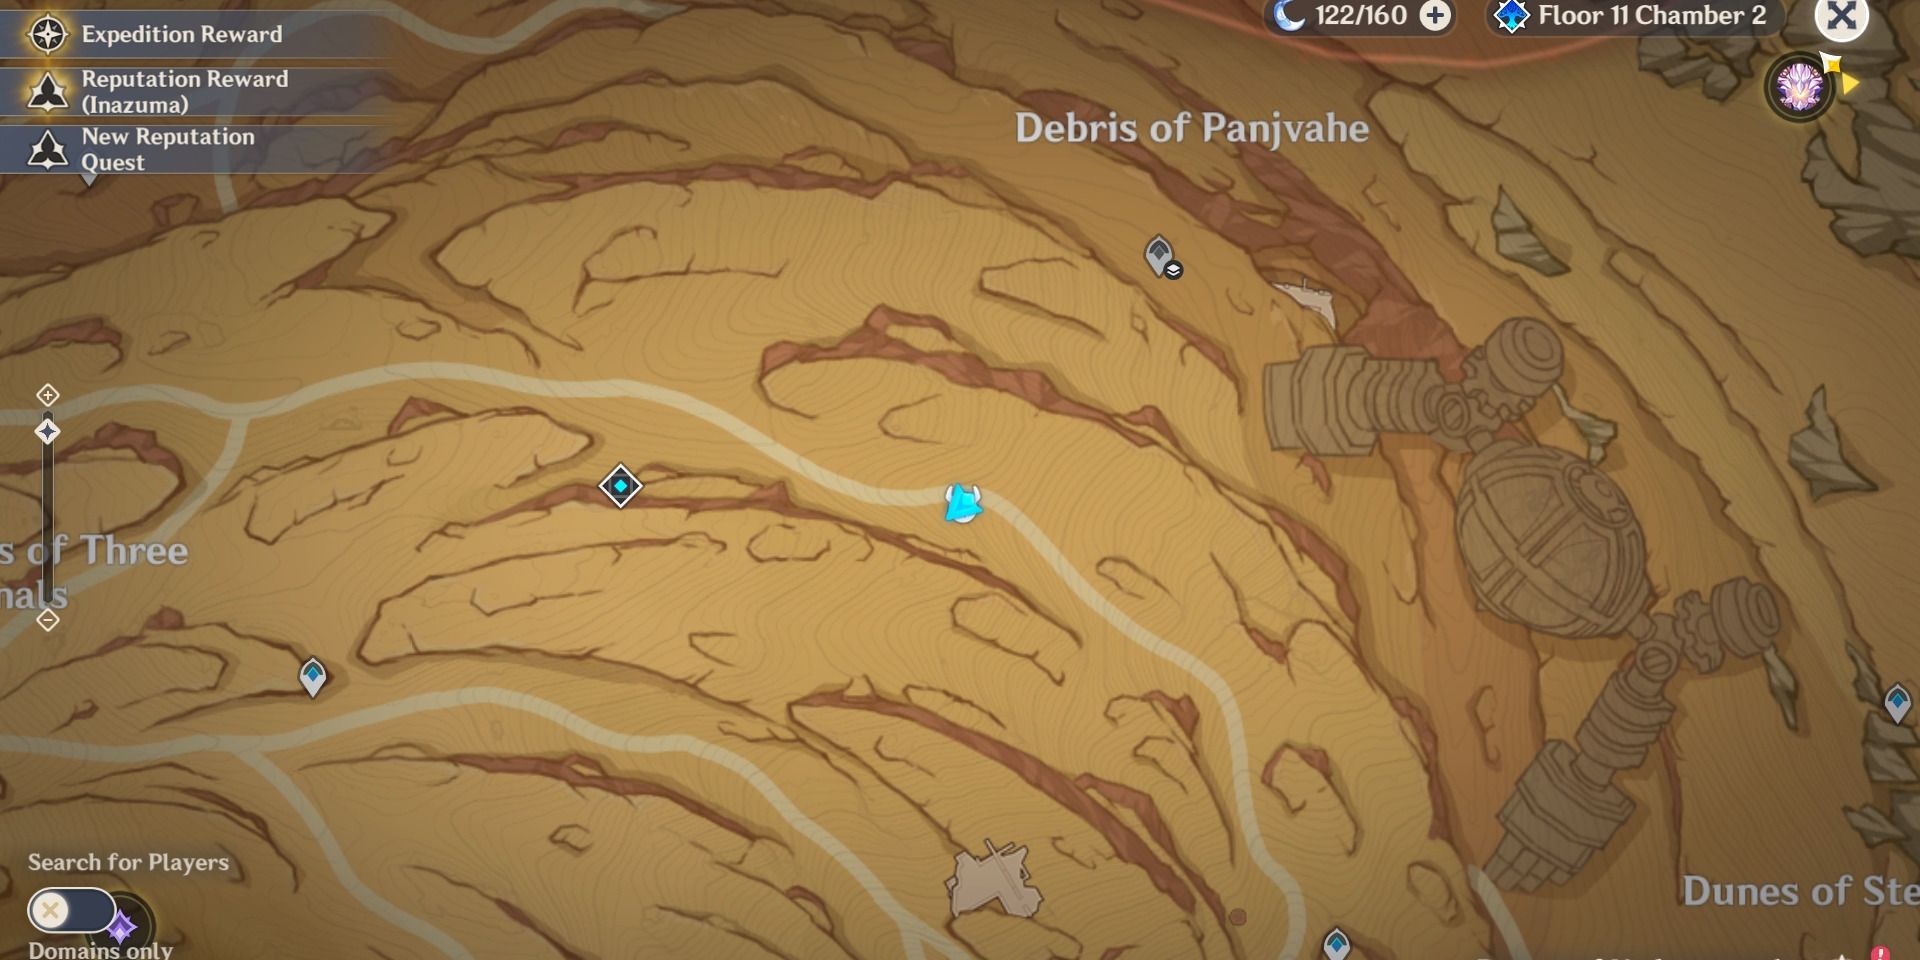 Image of the location on the map of the third mysterious stone slate near Fane of Panjvahe in Genshin Impact.